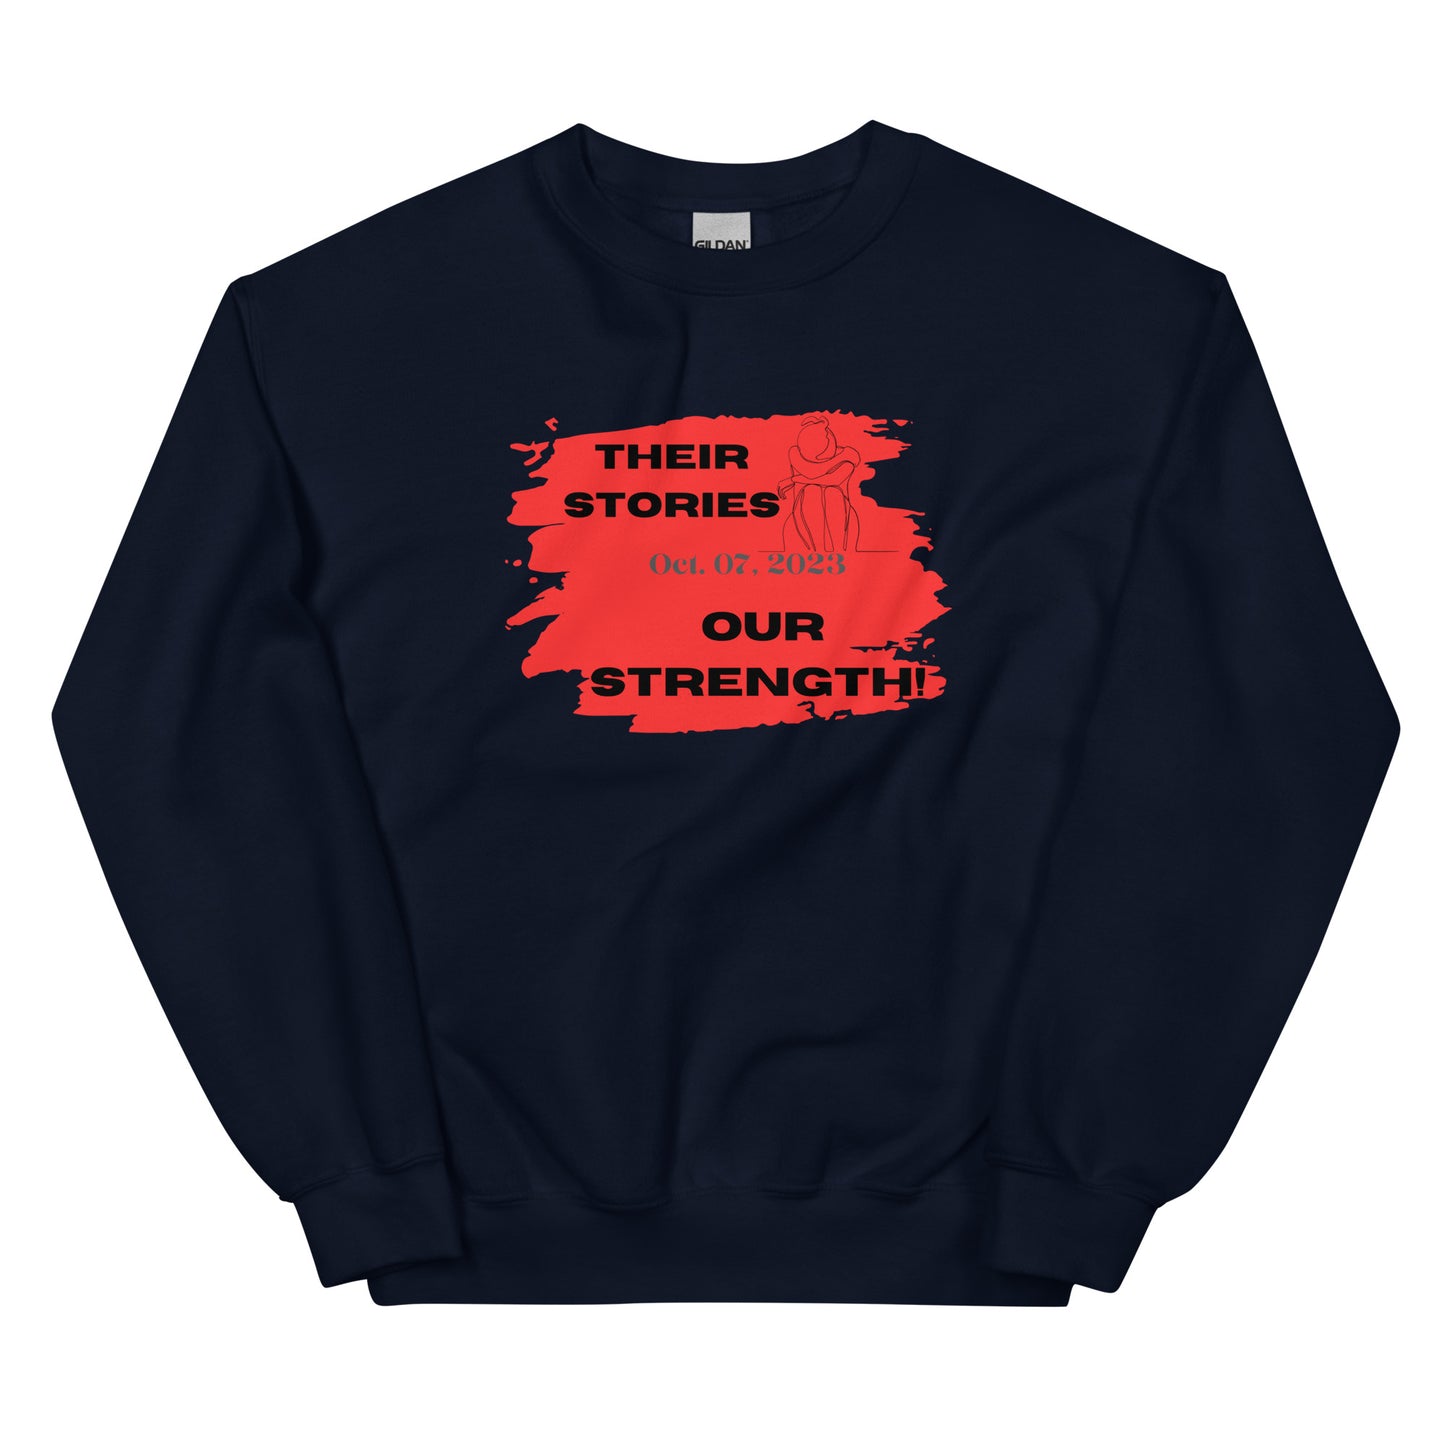 Their stories, our strength - Unisex Sweatshirt (10 colors)